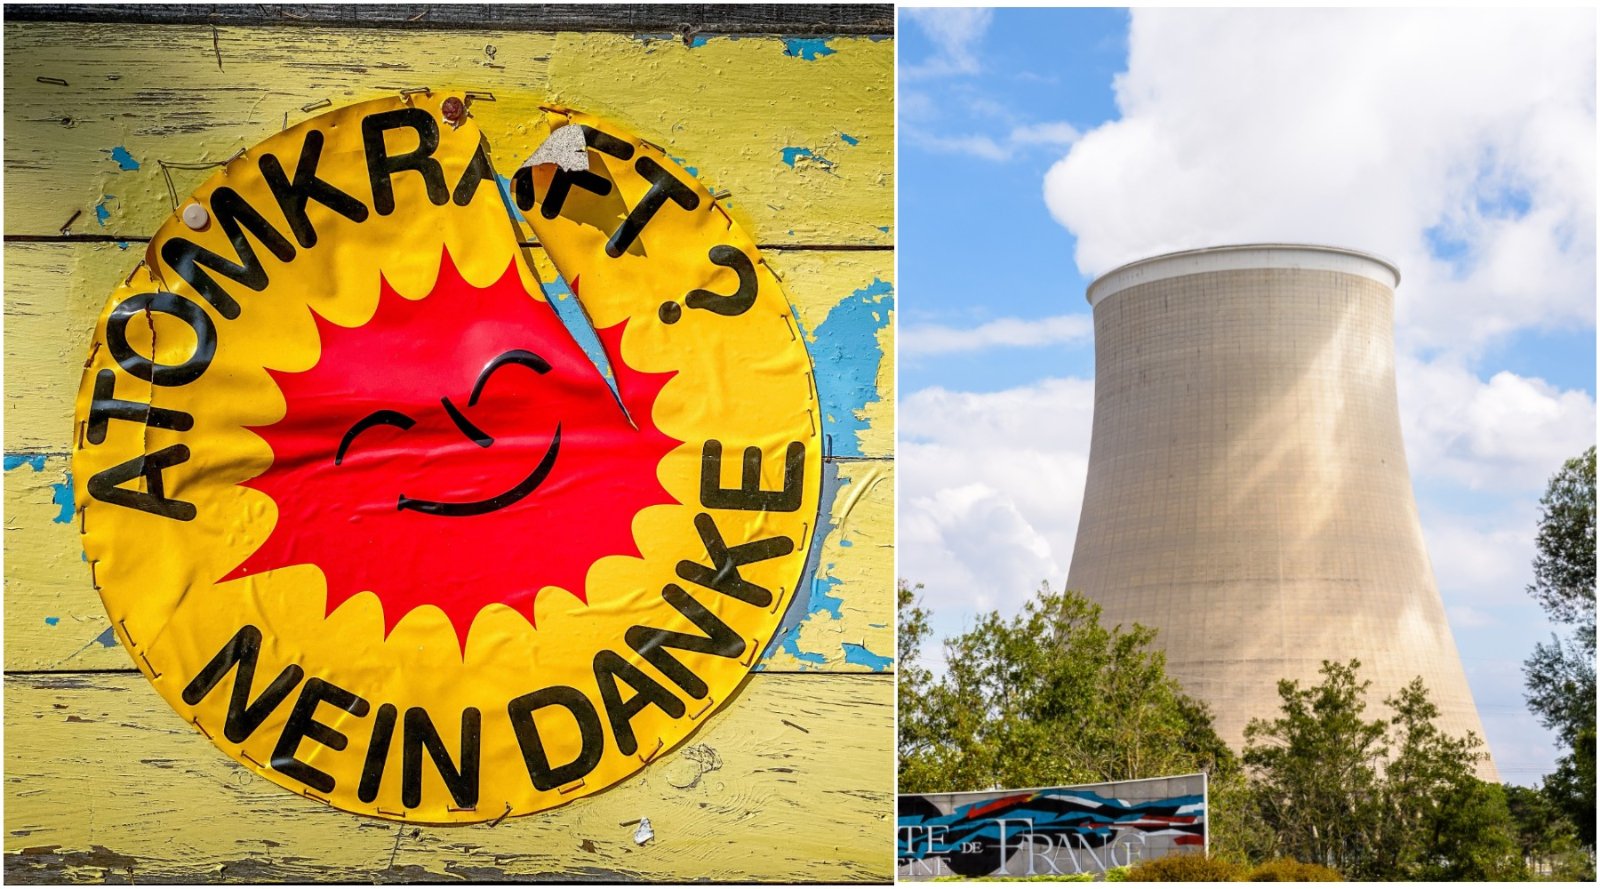 Can Europe go green without nuclear power?